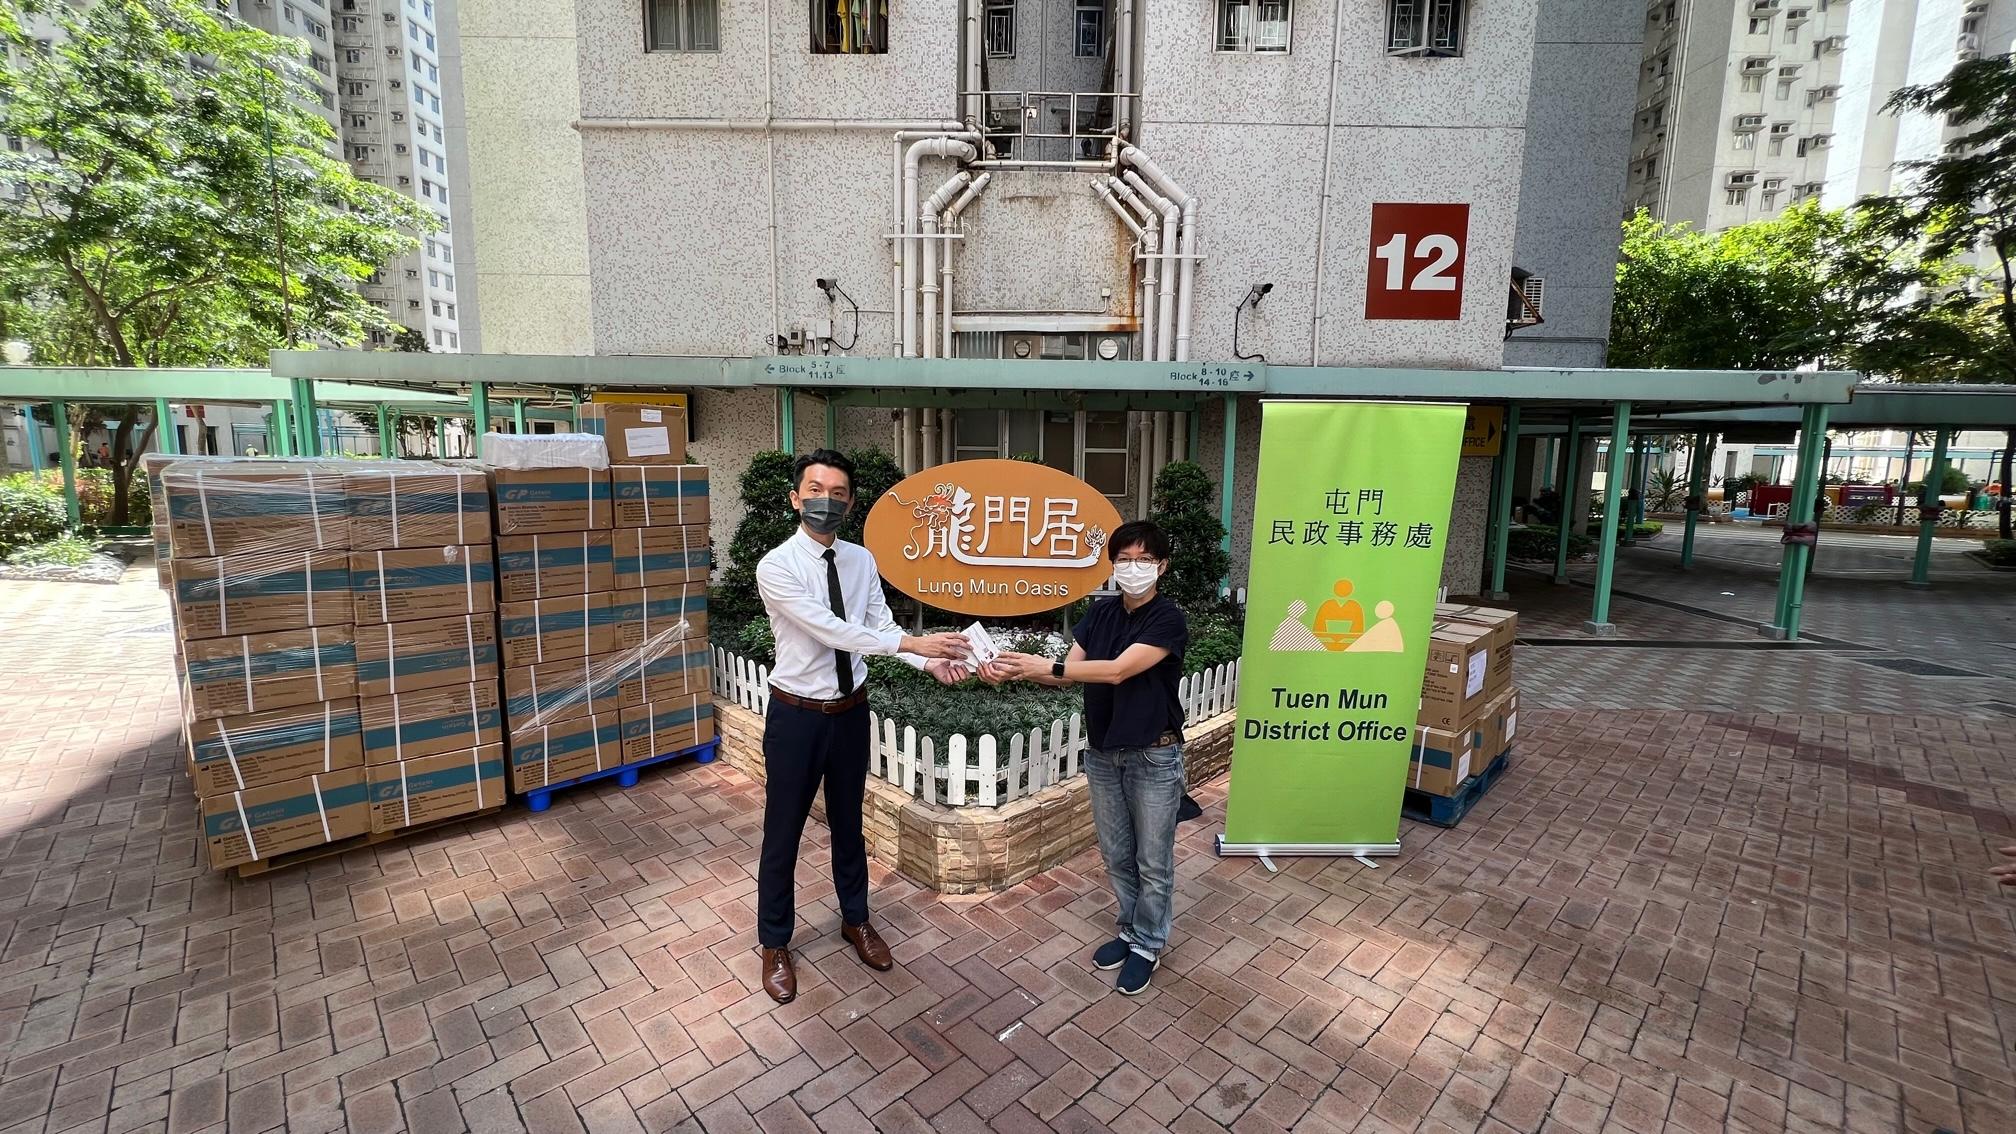 The Tuen Mun District Office today (July 11) distributed rapid test kits to households, cleansing workers and property management staff living and working in Lung Mun Oasis for voluntary testing through the property management company.